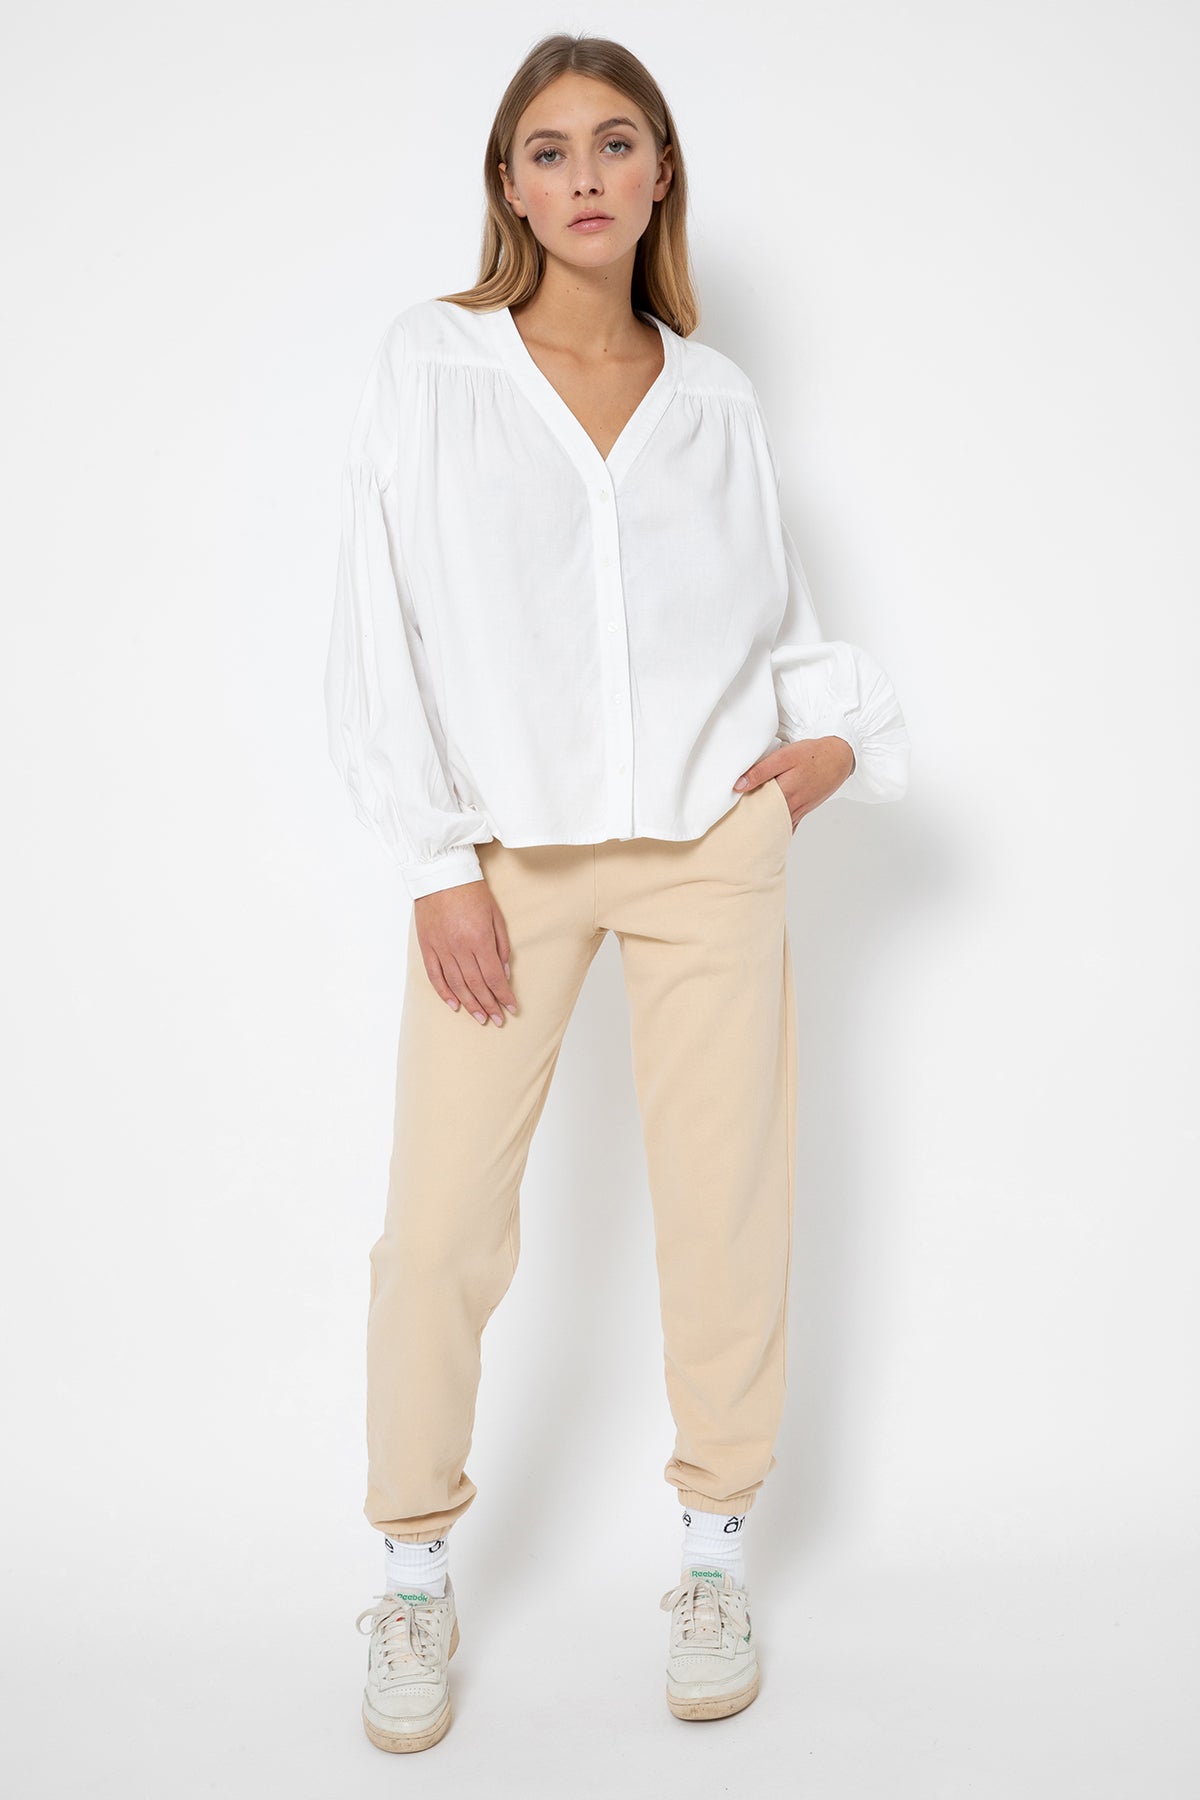 Gante Shirt with Puff Sleeves | White